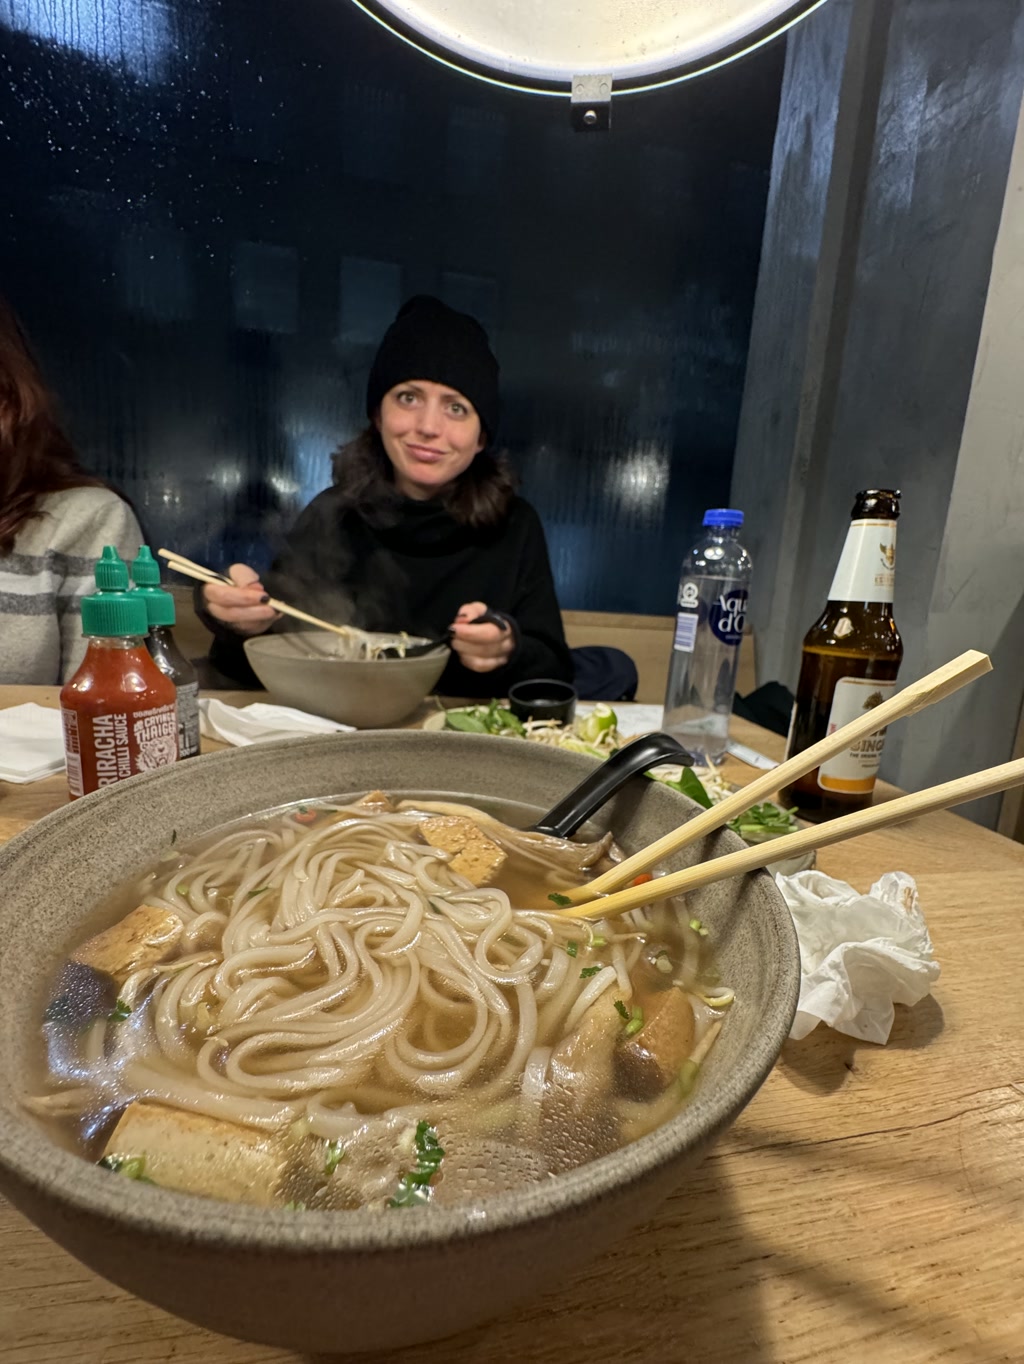 A person is sitting at a dining table in a restaurant, with a large bowl of steaming udon noodle soup in front of them. They are holding a pair of chopsticks in one hand and a spoon in the other, poised to eat. The individual appears to be wearing a black beanie and a black turtleneck. The table also has a bottle of beer and a water bottle to the right, along with a bottle of Sriracha hot sauce. The environment suggests an informal setting, possibly during evening hours as indicated by the darkness visible through the round window behind the diner.